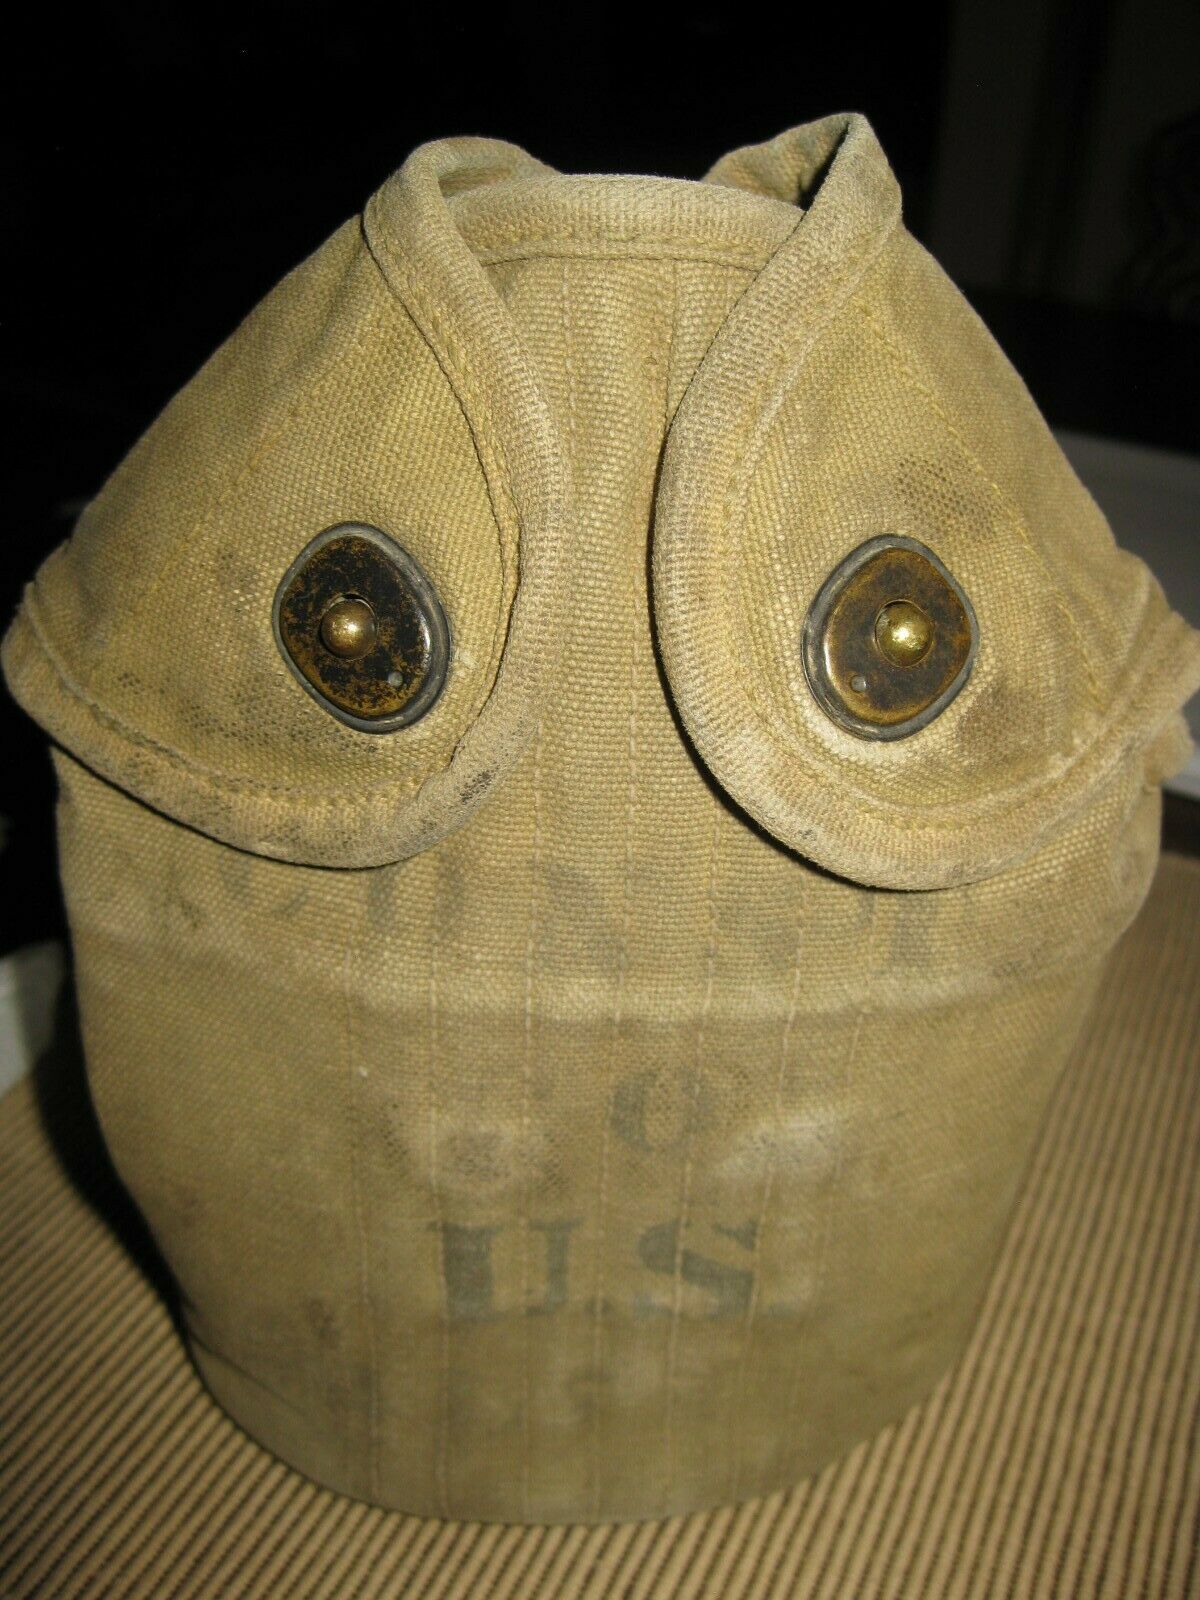 Ww1 1917 Us Military Canteen Cover Only By Progressive Over 100 Years Old!